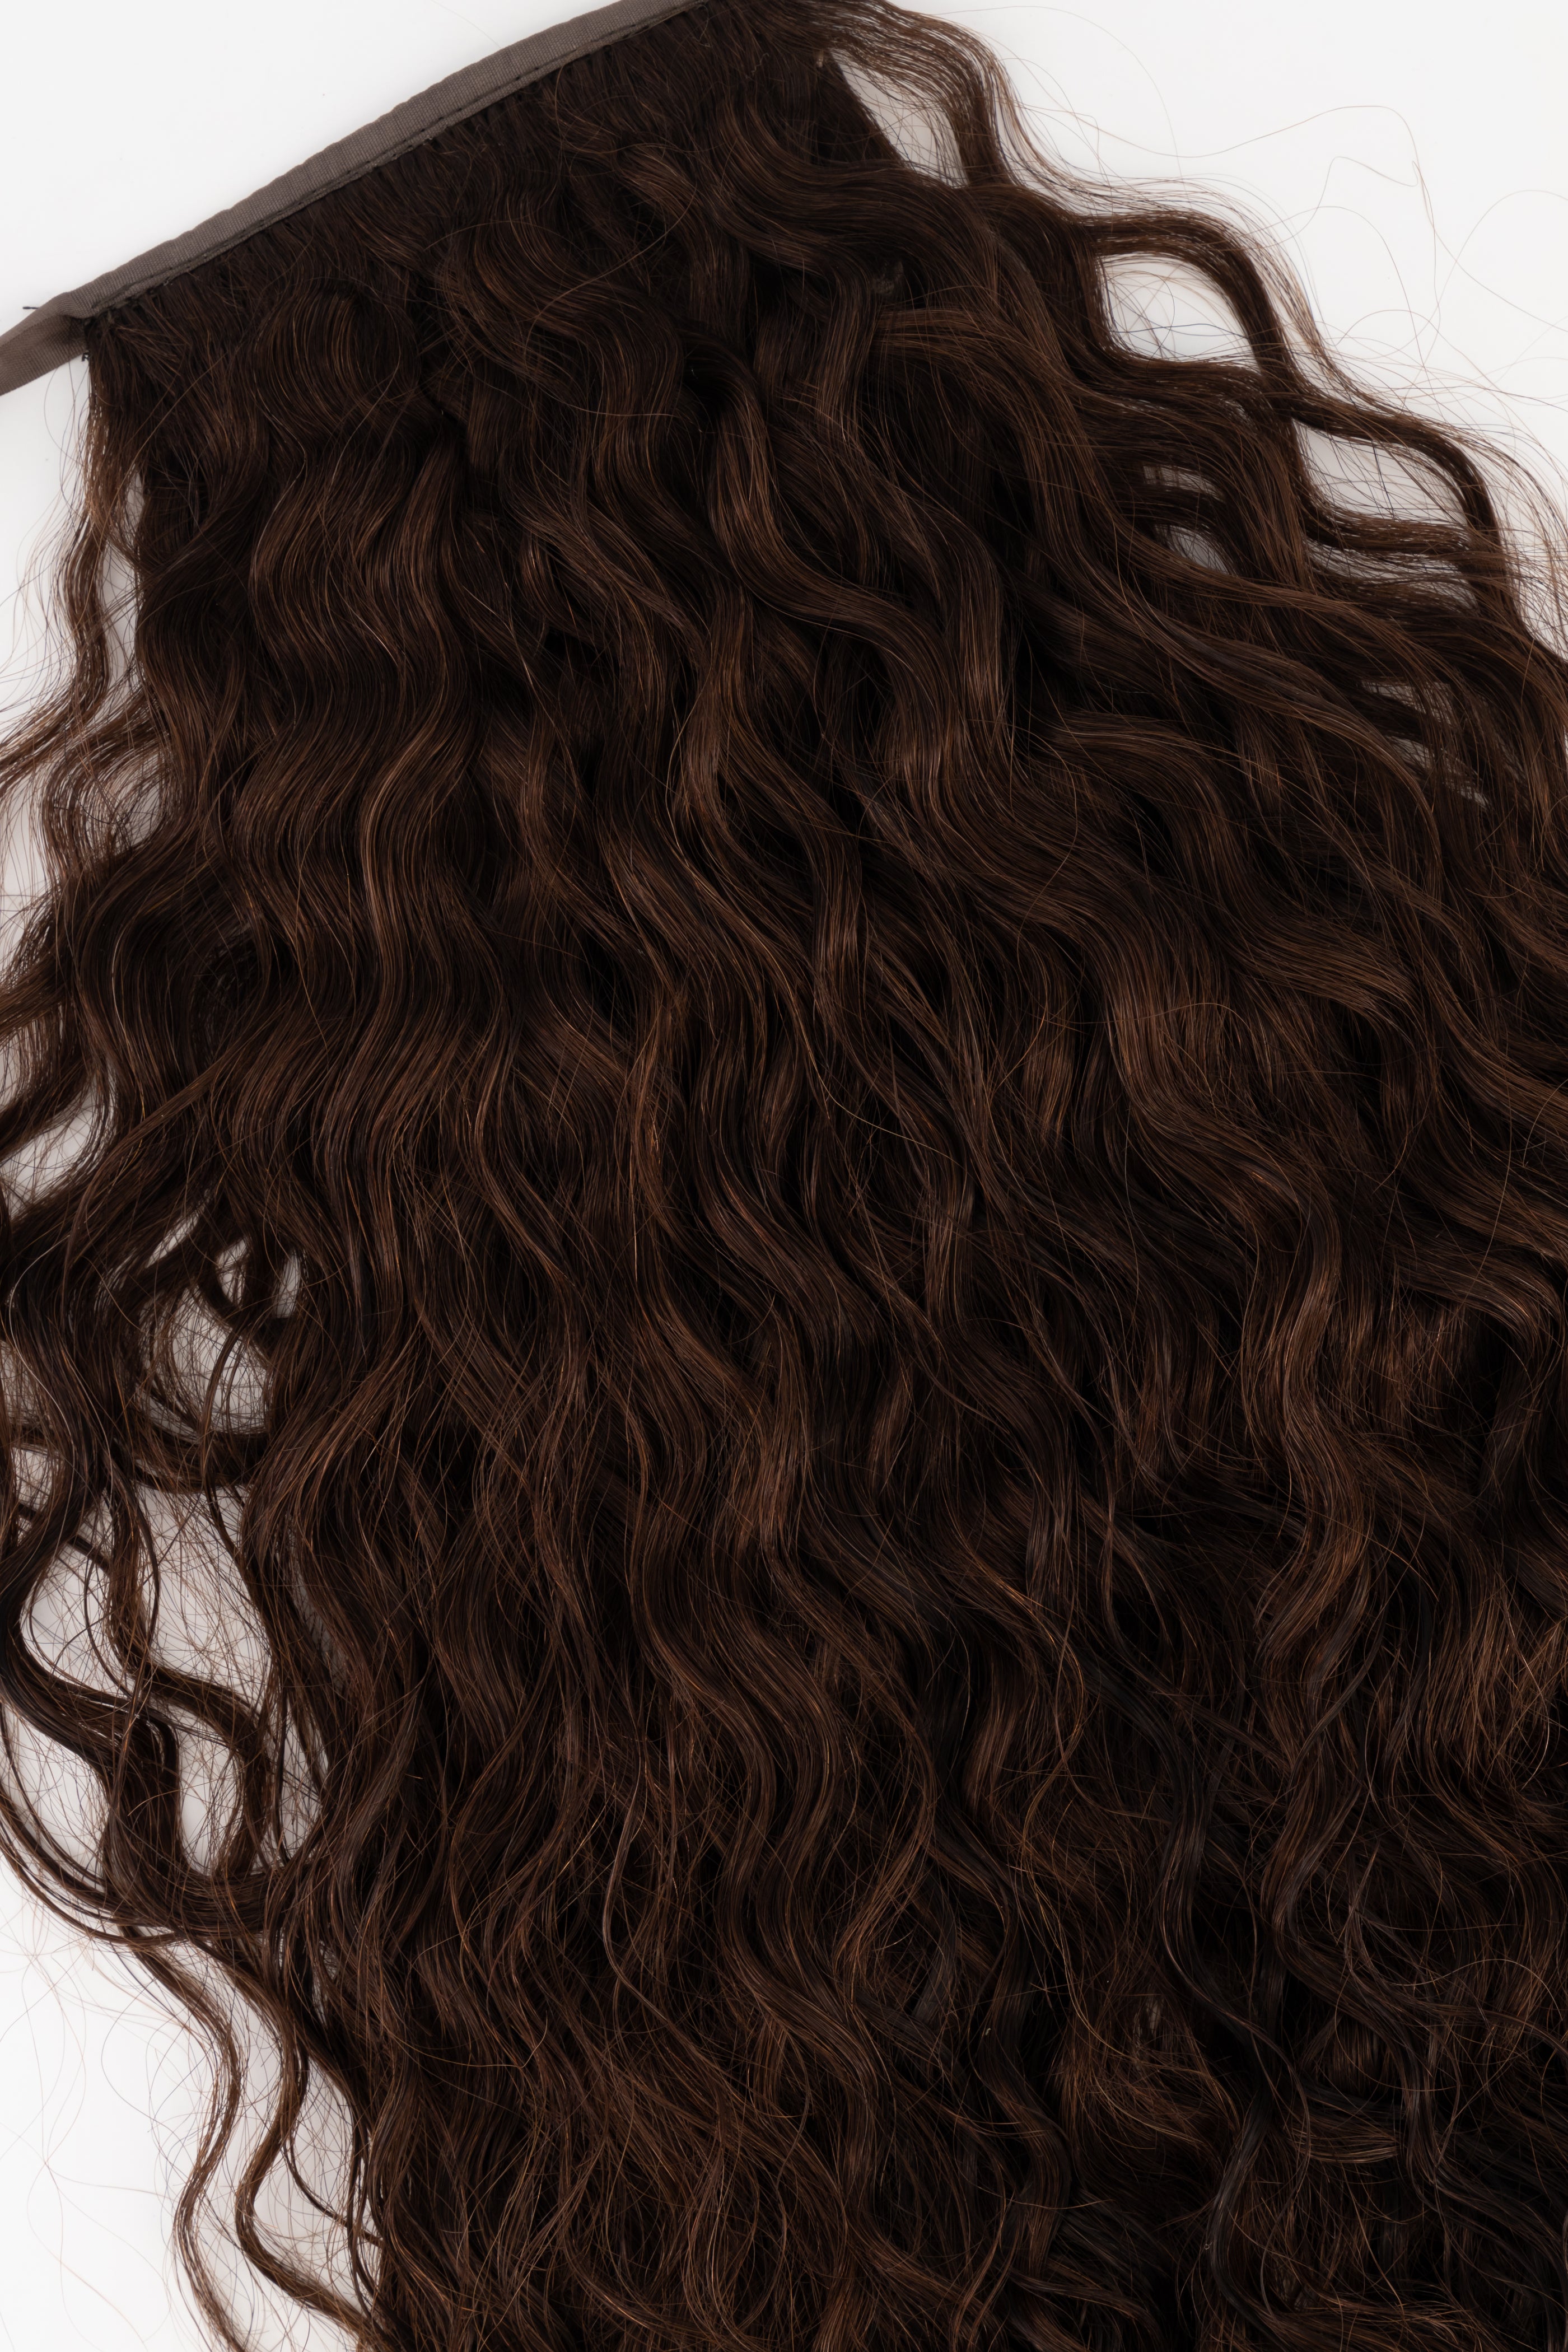 Frontrow curly clip-in ponytail extensions in dark brown